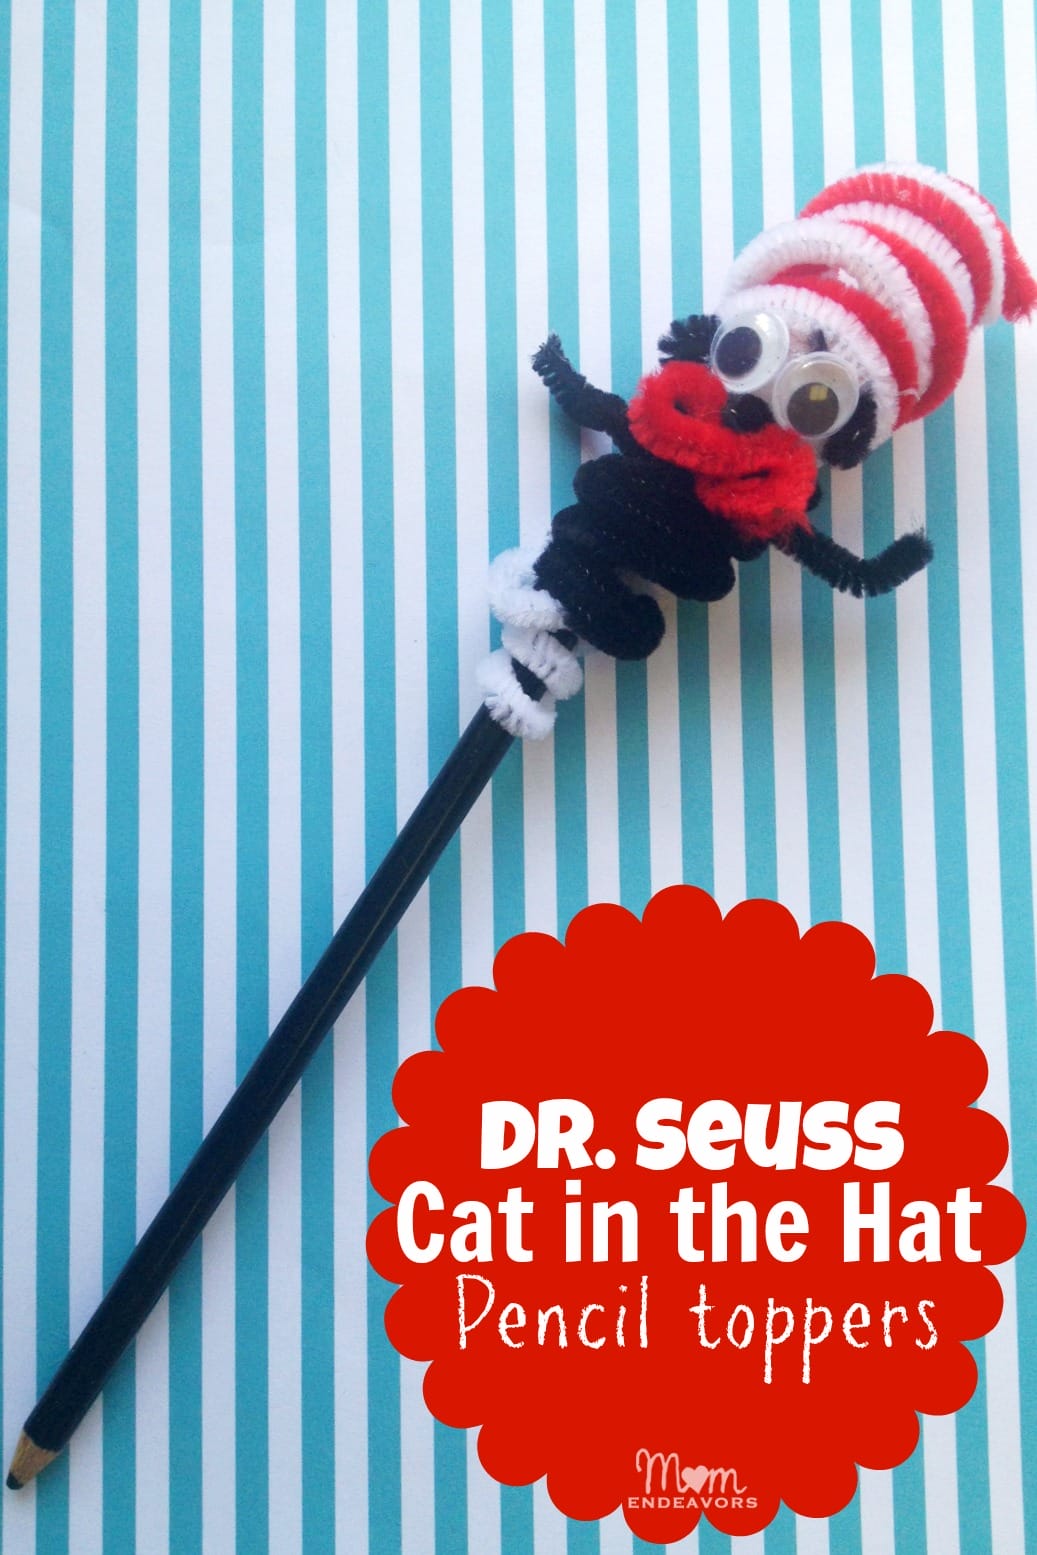 Dr.-Seuss-Cat-in-the-Hat-Pencil-Toppers